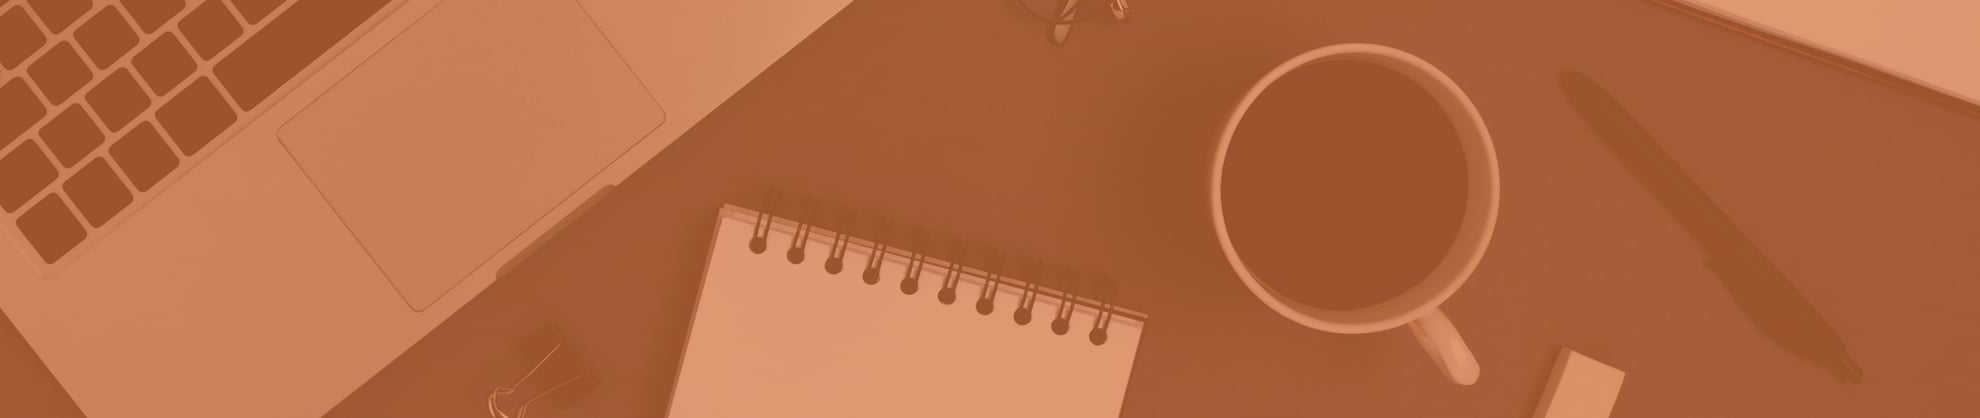 playbook_banners thin 01